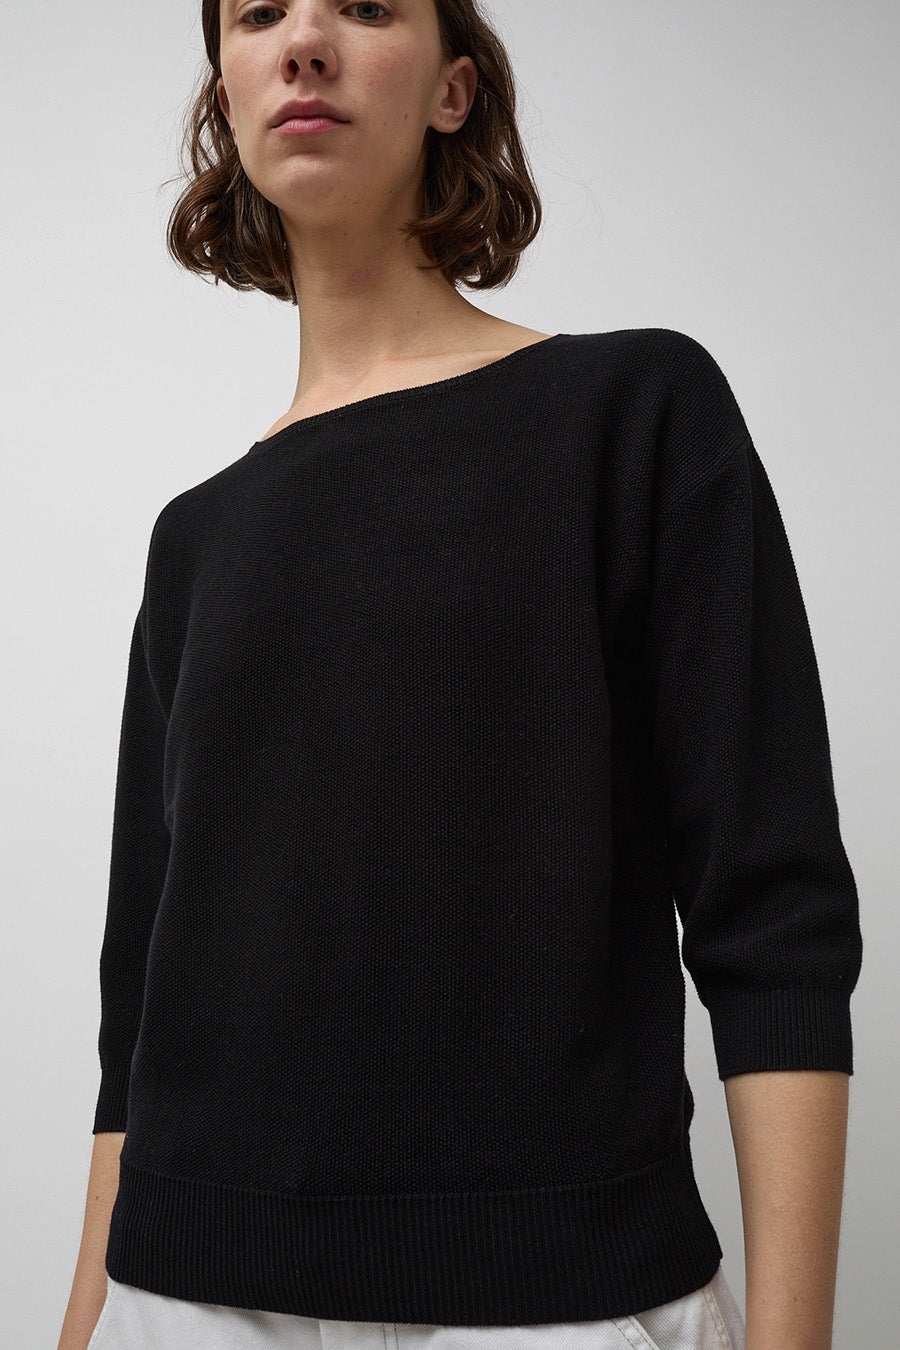 Rue Blanche Bees 34 Sleeve Top in Black